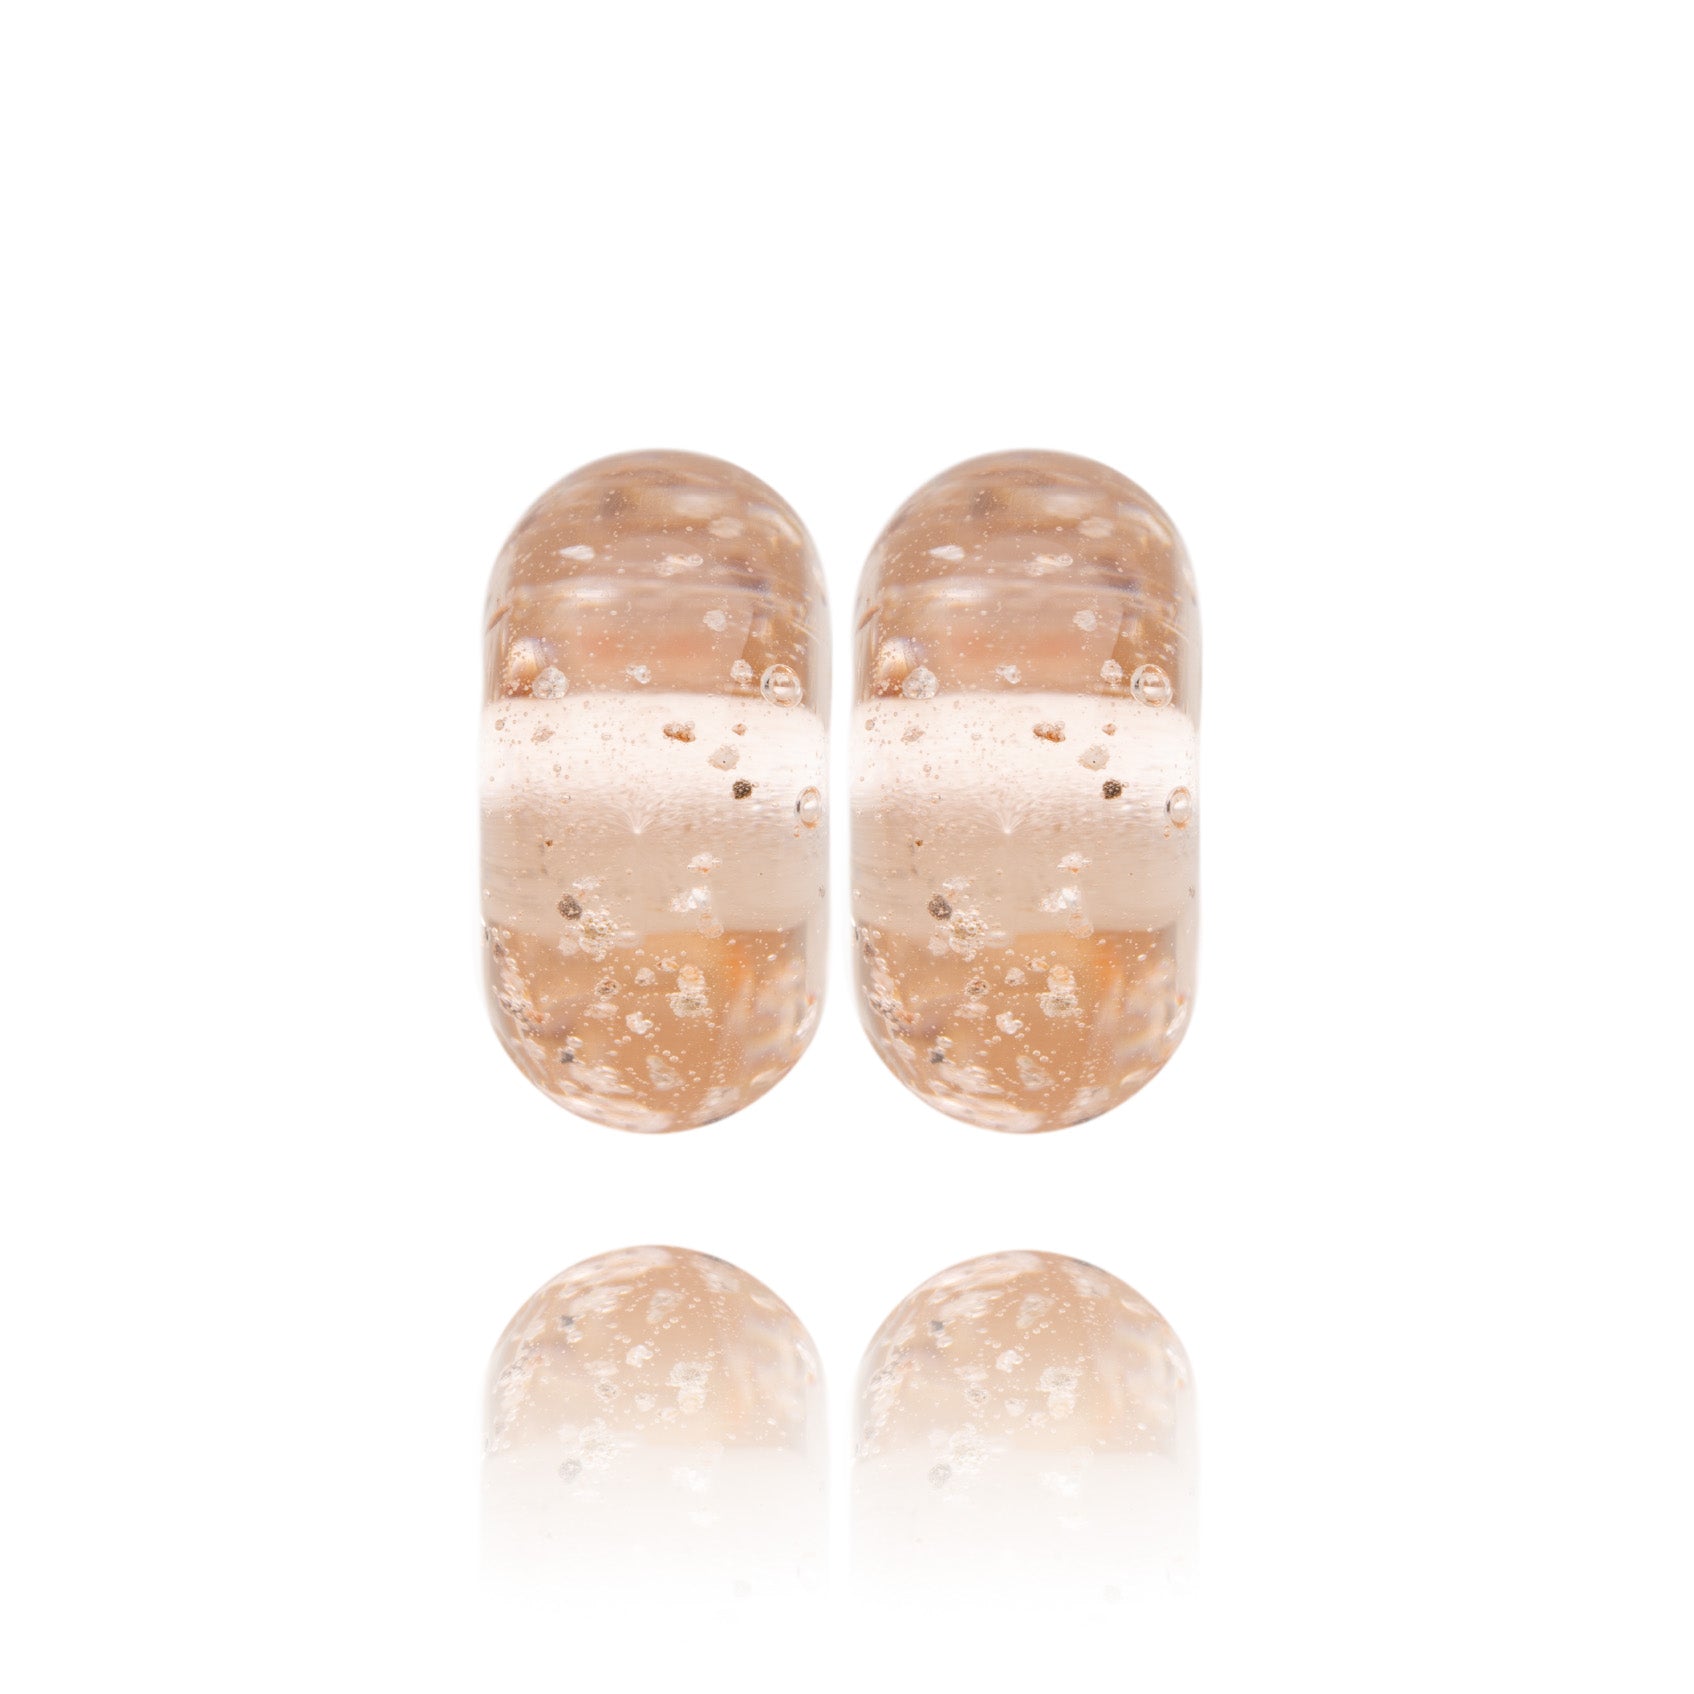 Peach coloured glass beads made with grains of beach sand melted into the glass.